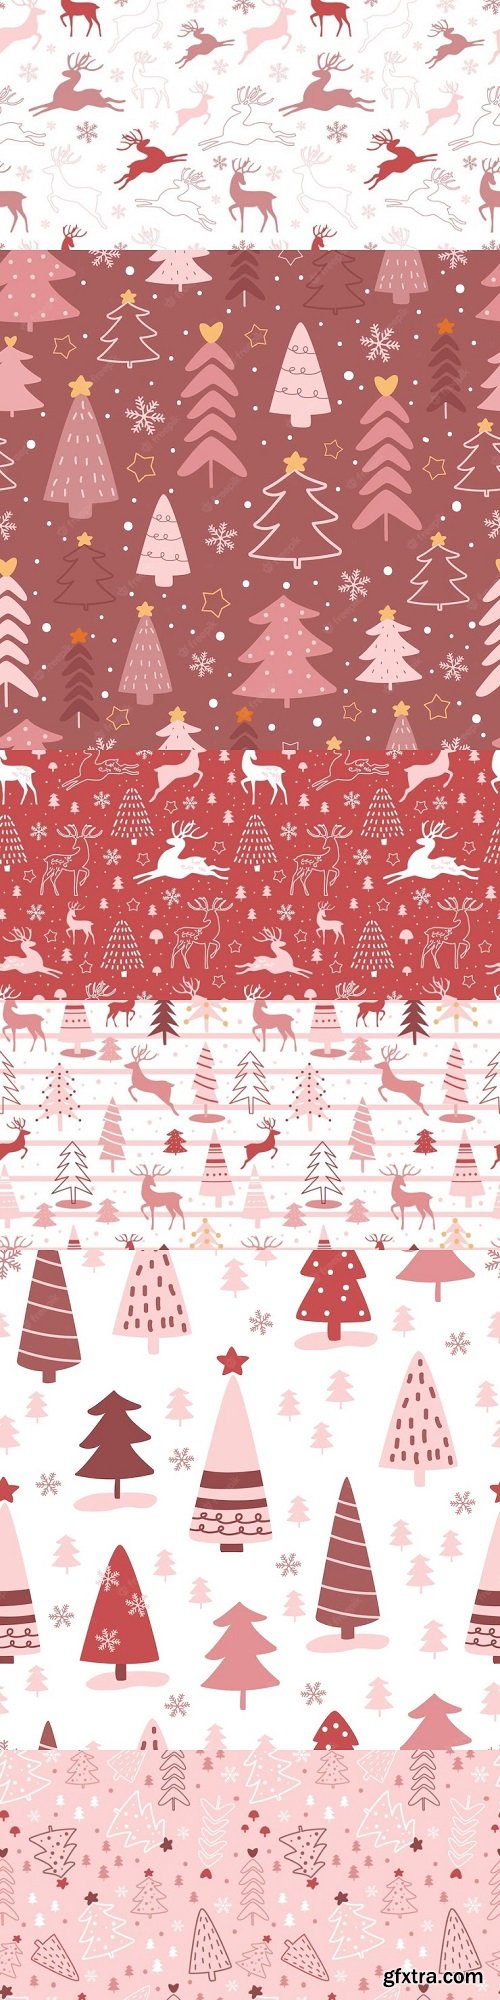 Winter and christmas themed seamless patterns » GFxtra